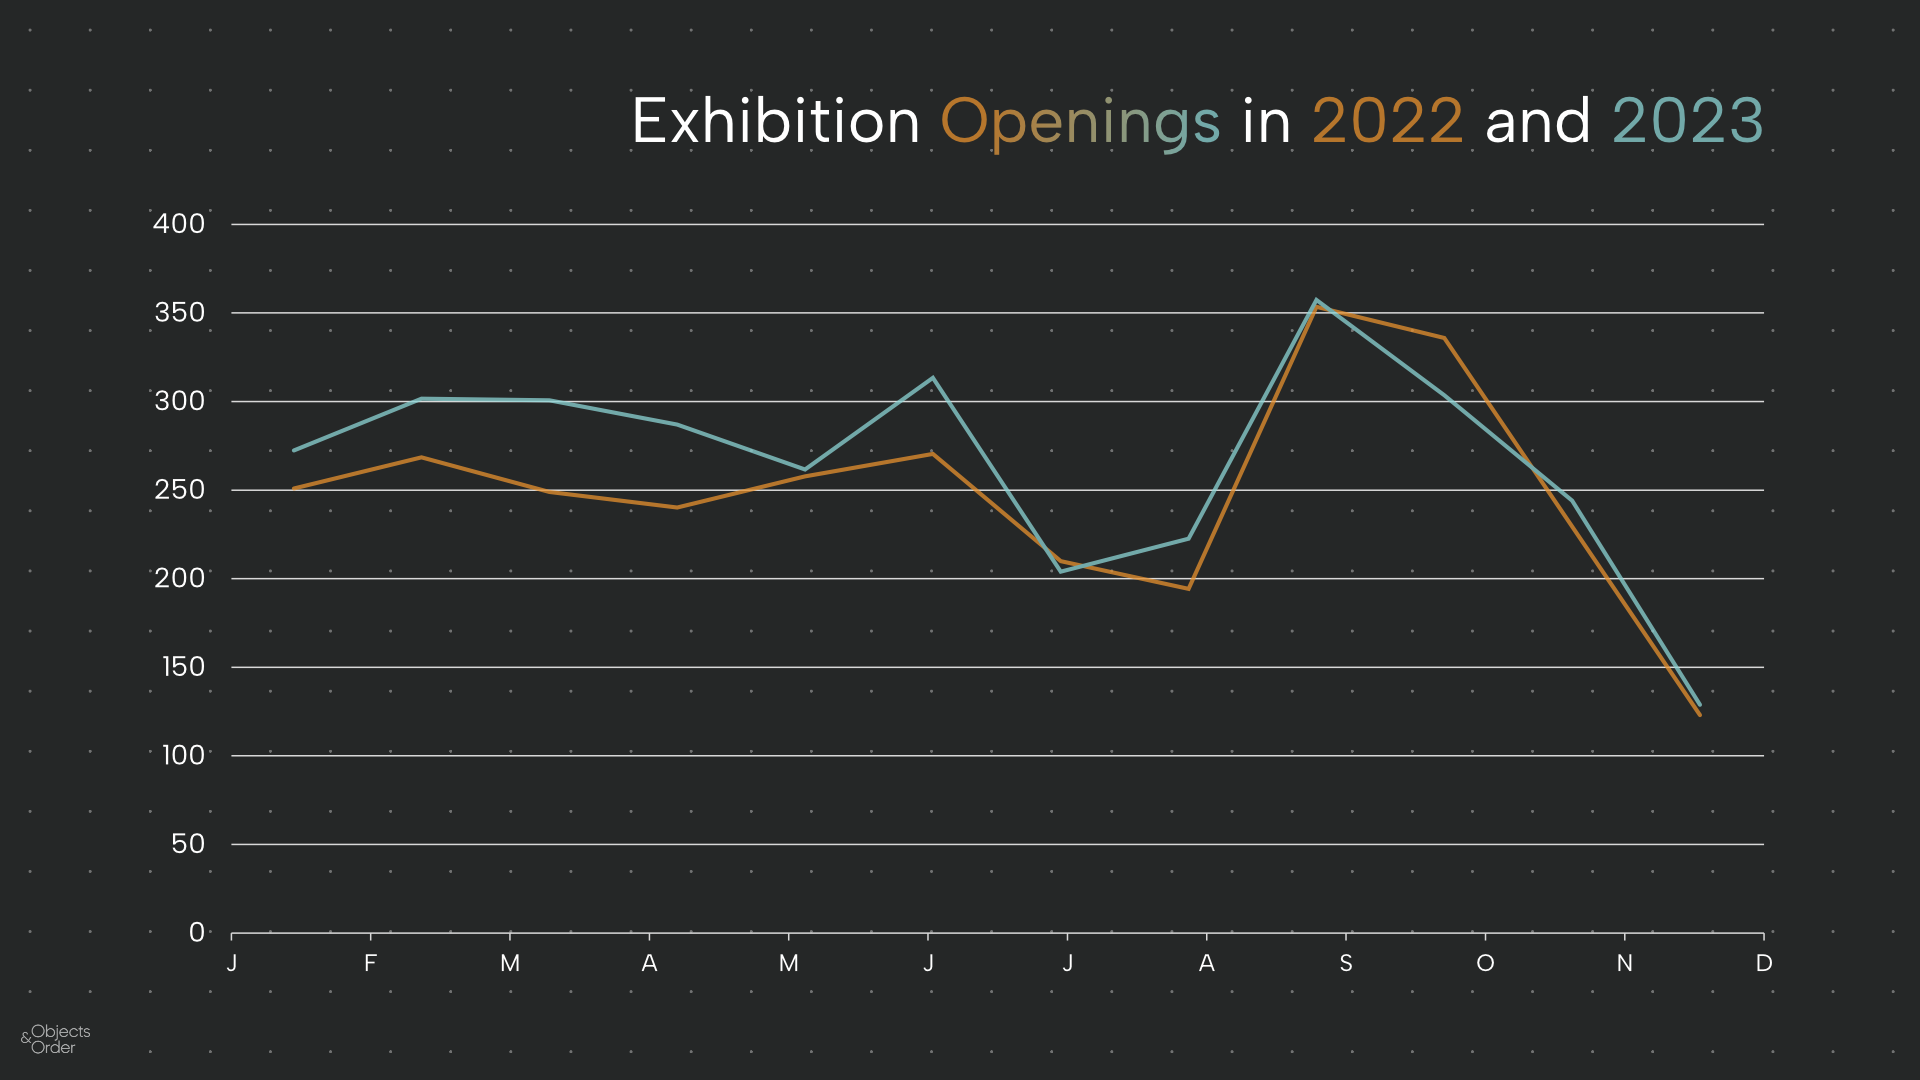 Exhibition Openings in 2022 and 2023